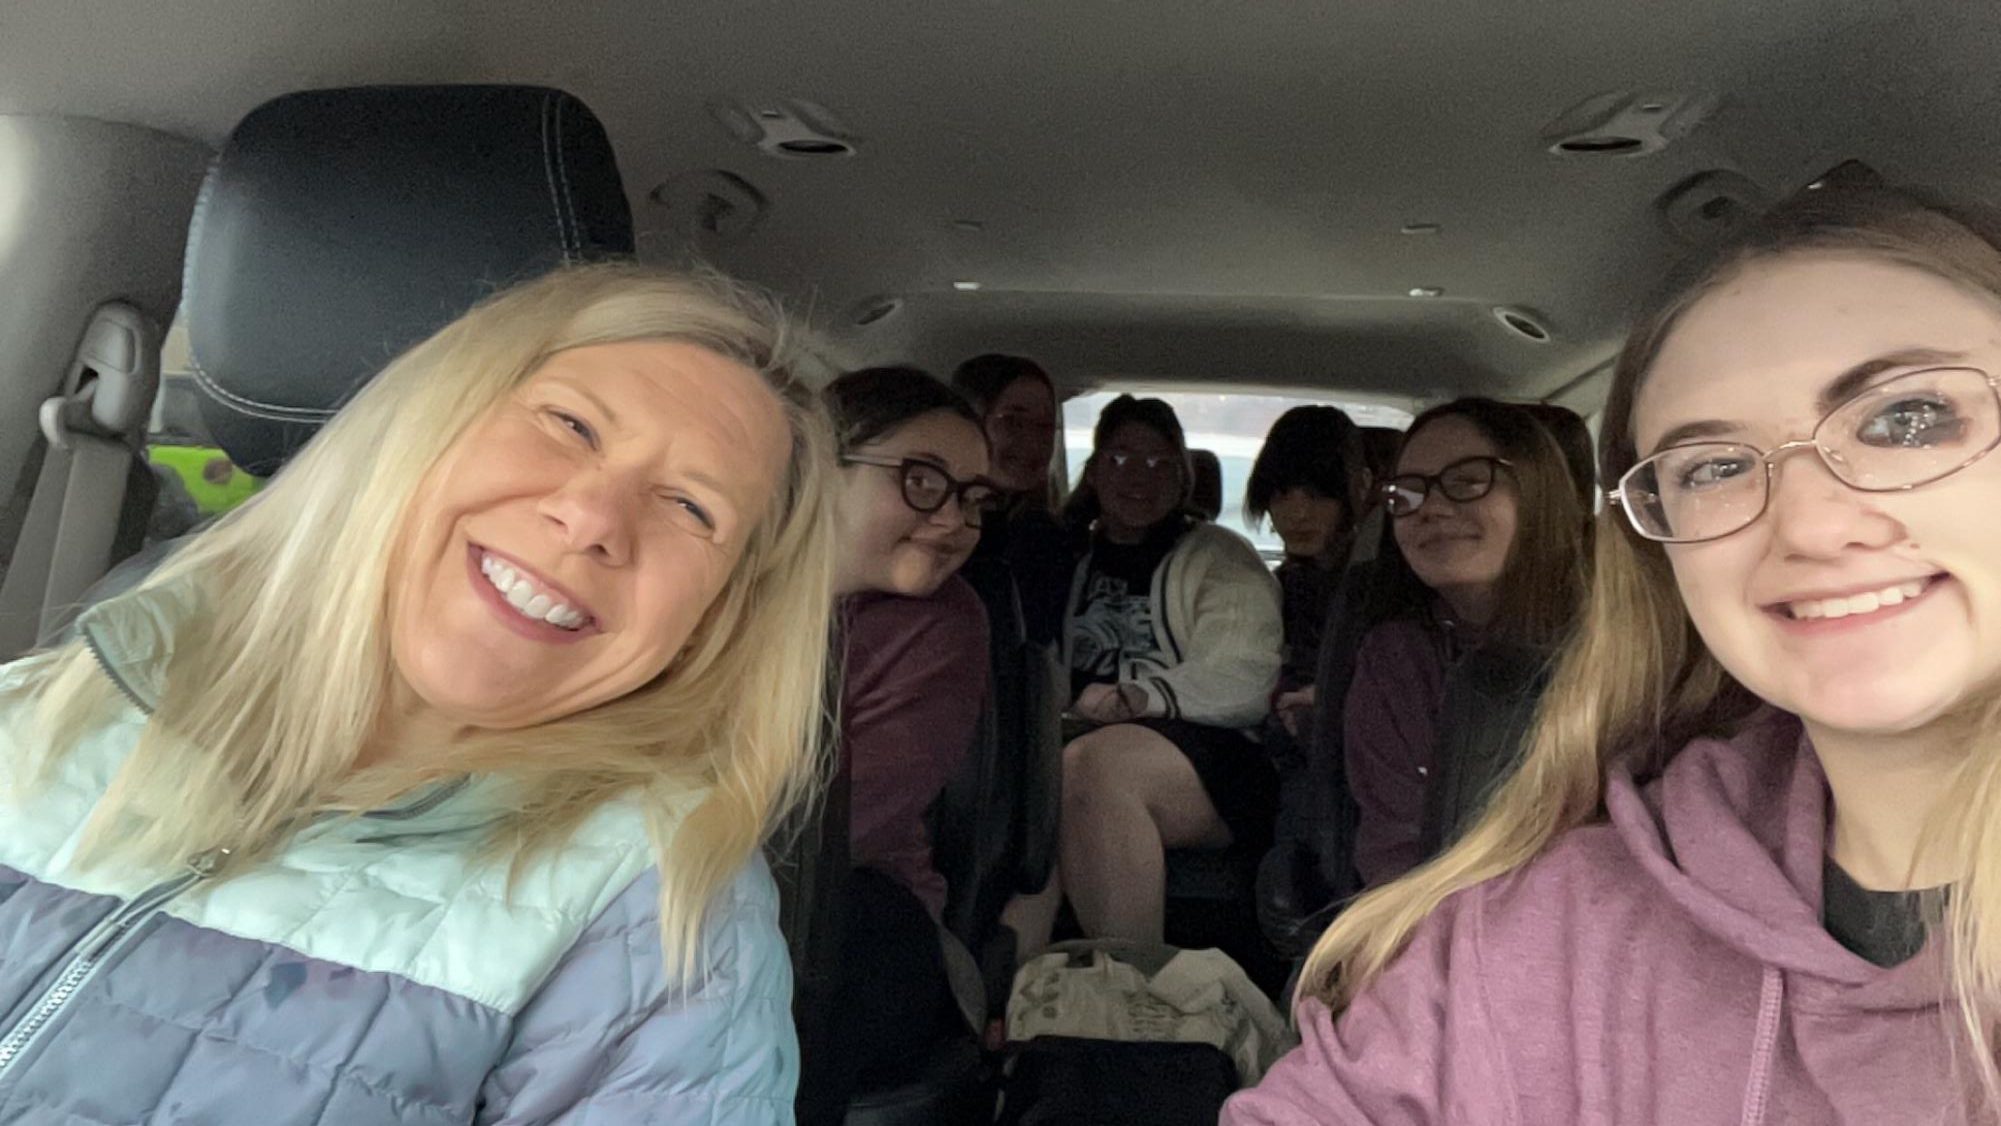 Last time. The Mountain Echo editors all rode in a van together on the way to the competition. To get excited for the day, they all listened to music, and talked about fun times at the previous competition. 